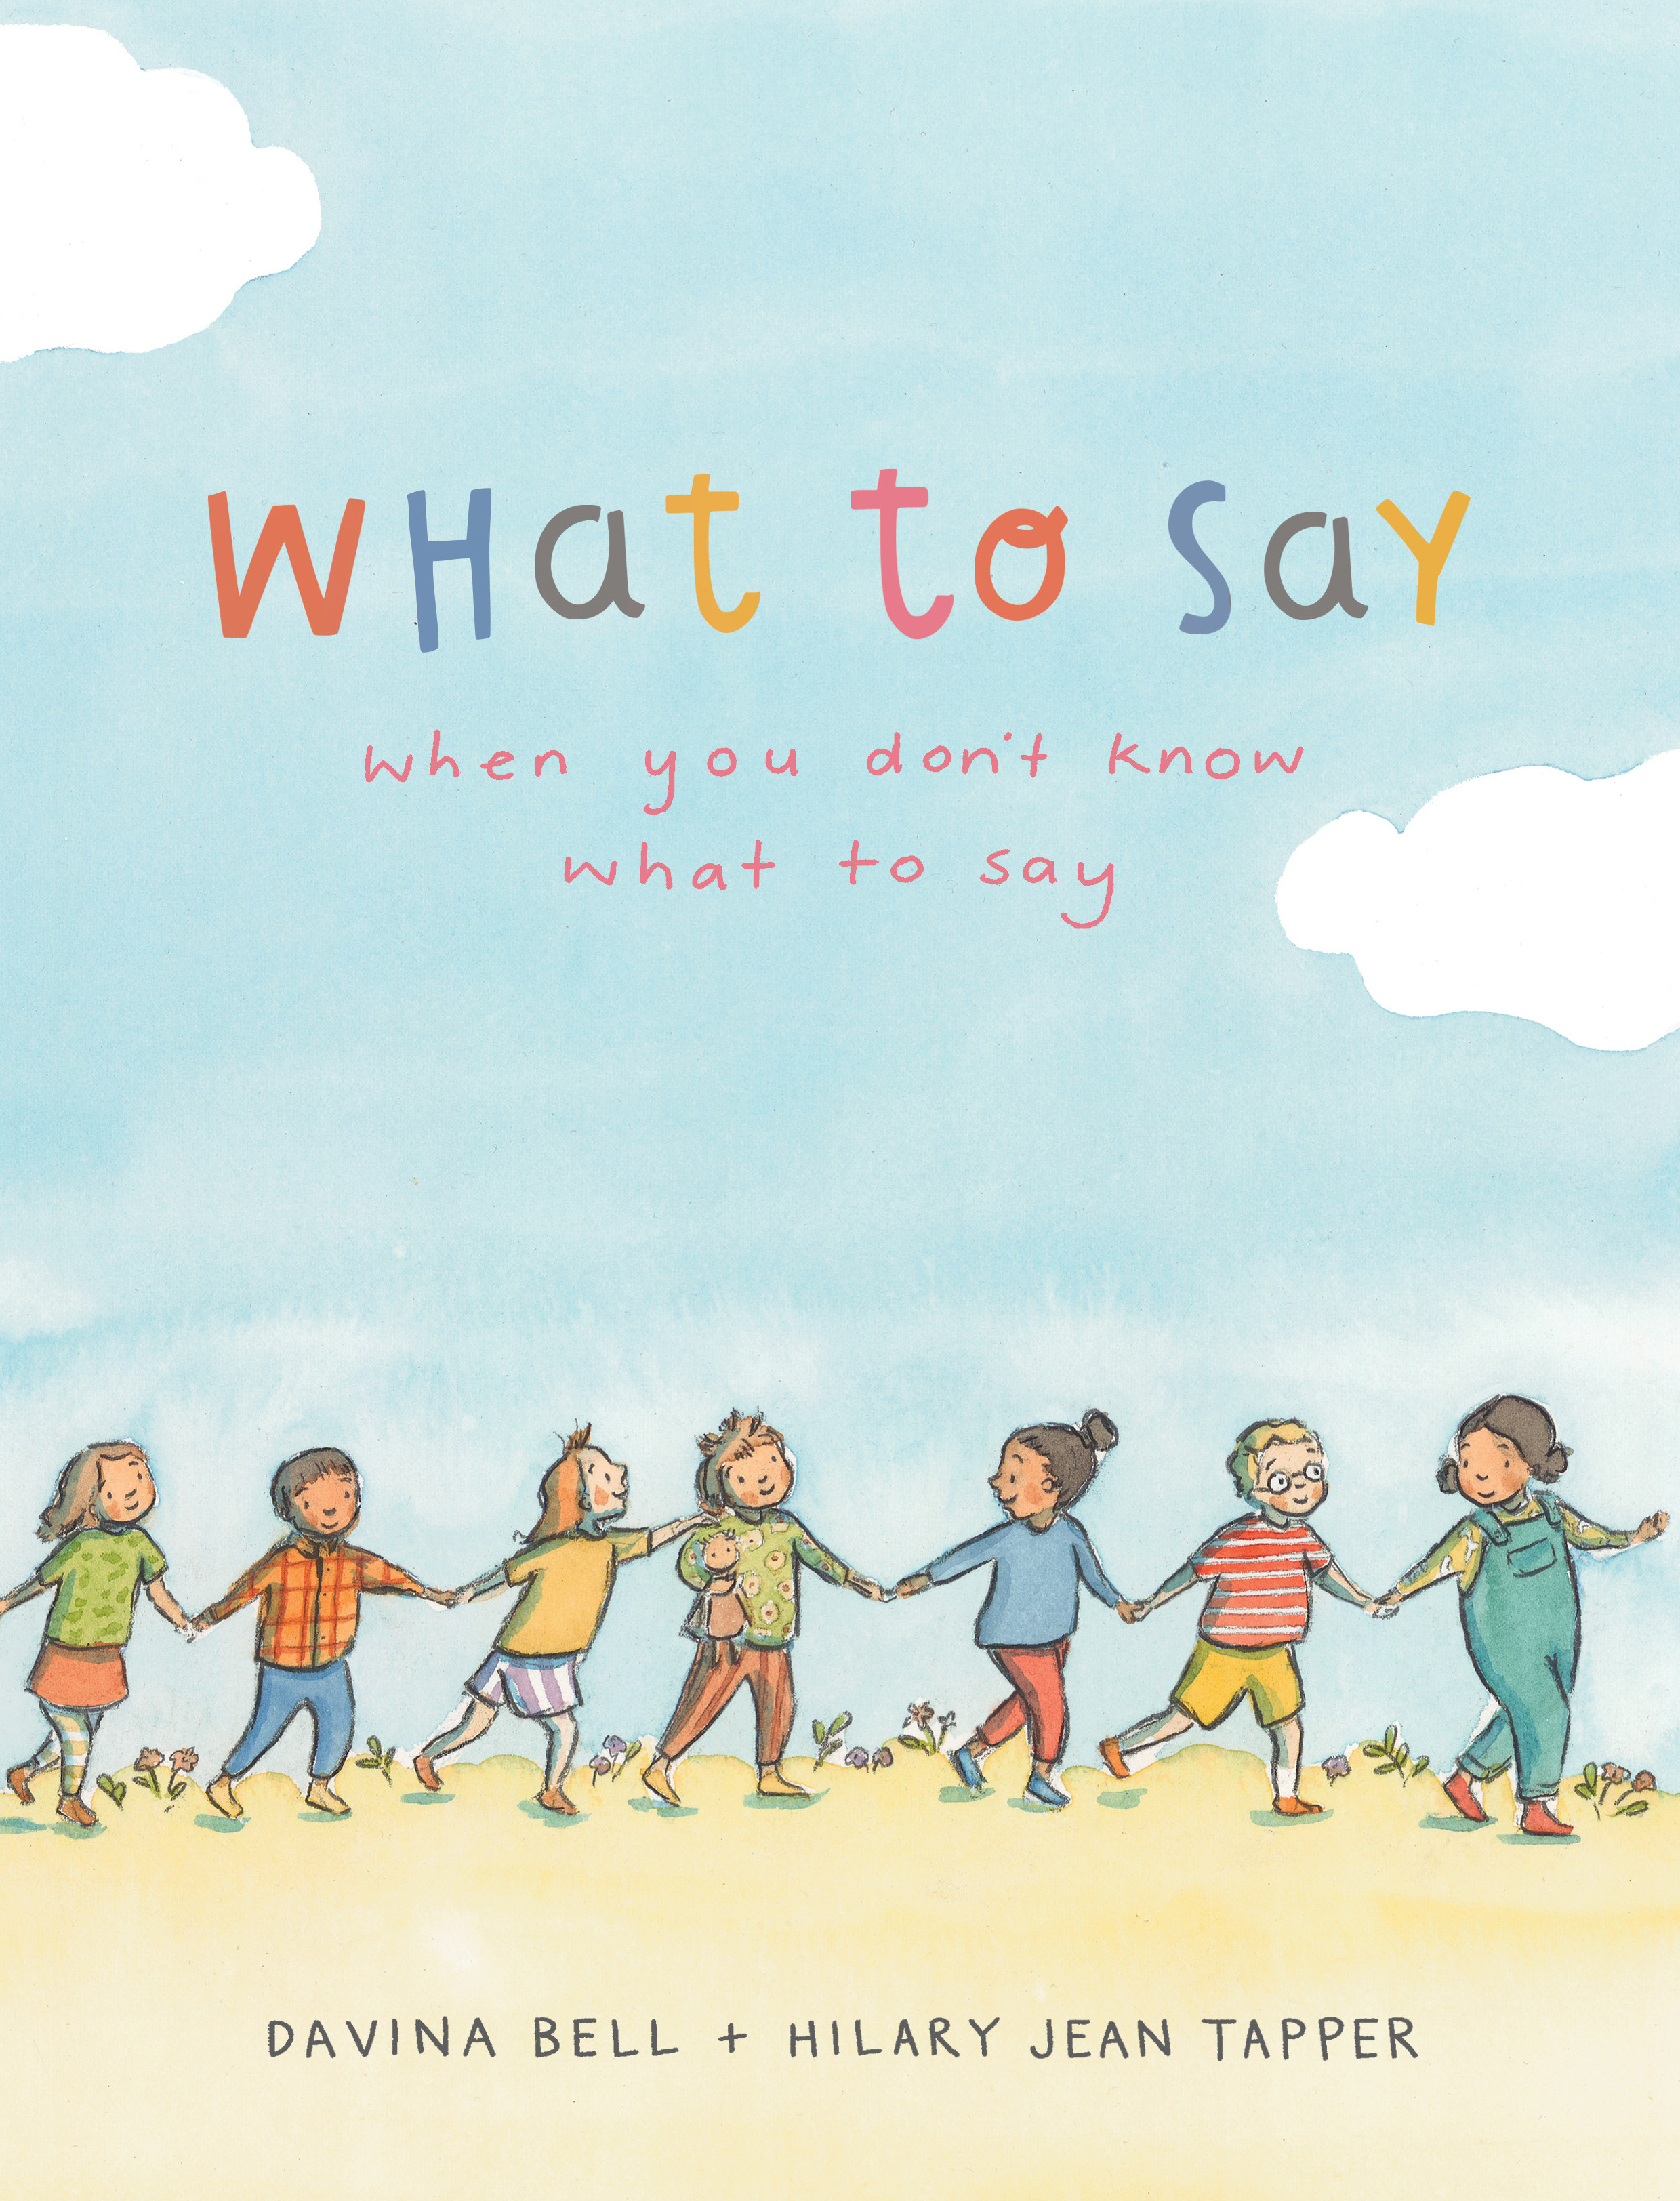 What to say book cover by Davina Bell. Illustrated children walking on the beach